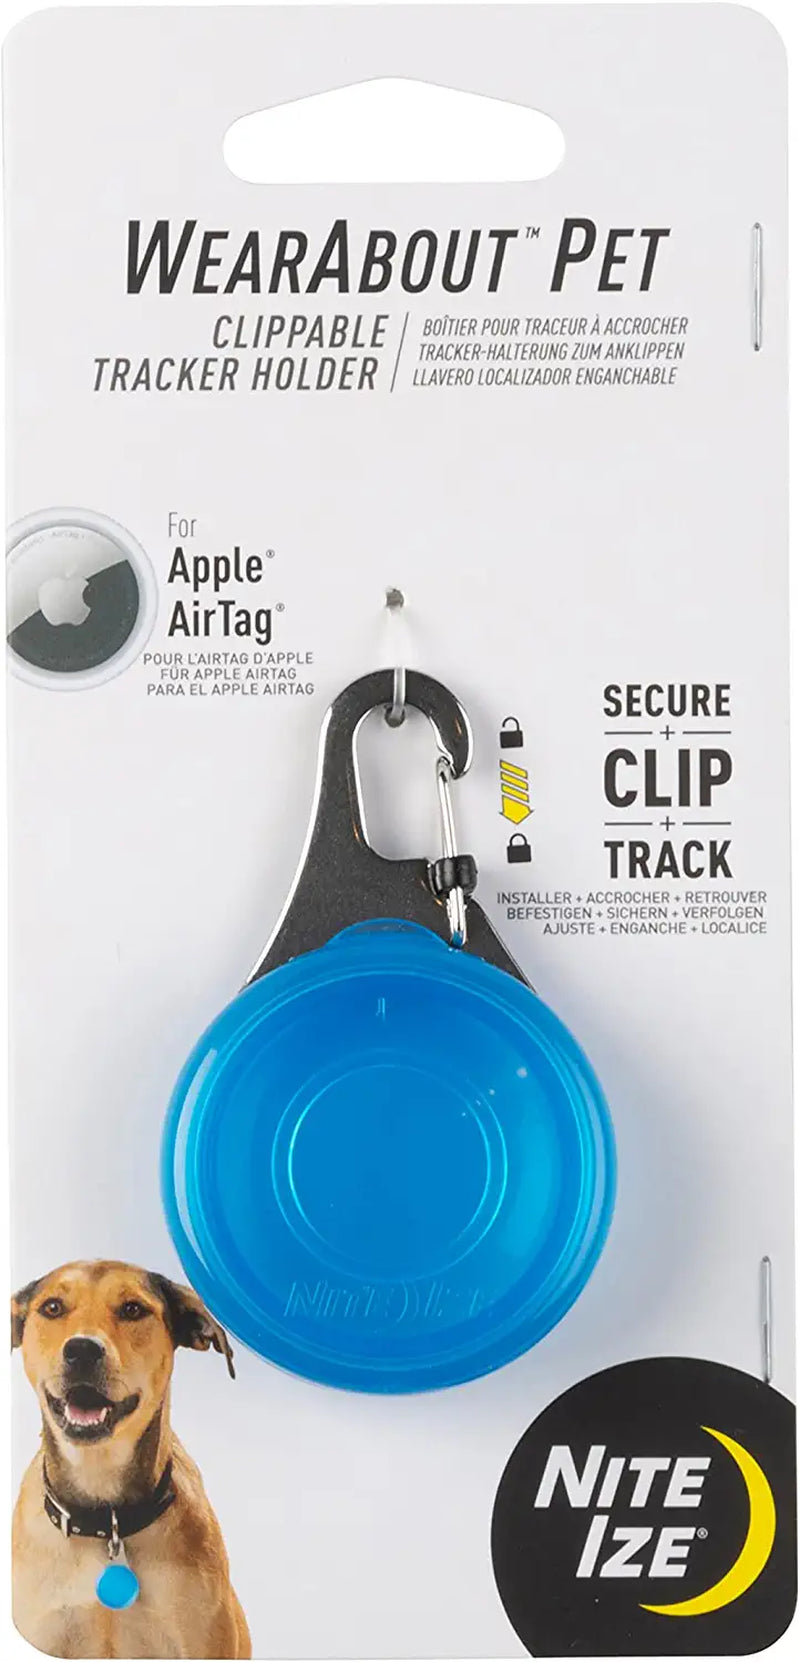 Nite Ize, Inc. WATP-03T-R6 Nite IZE Wearabout Clippable, Apple Airtag Locking Carabiner for Pets, Blue Tracker Holder